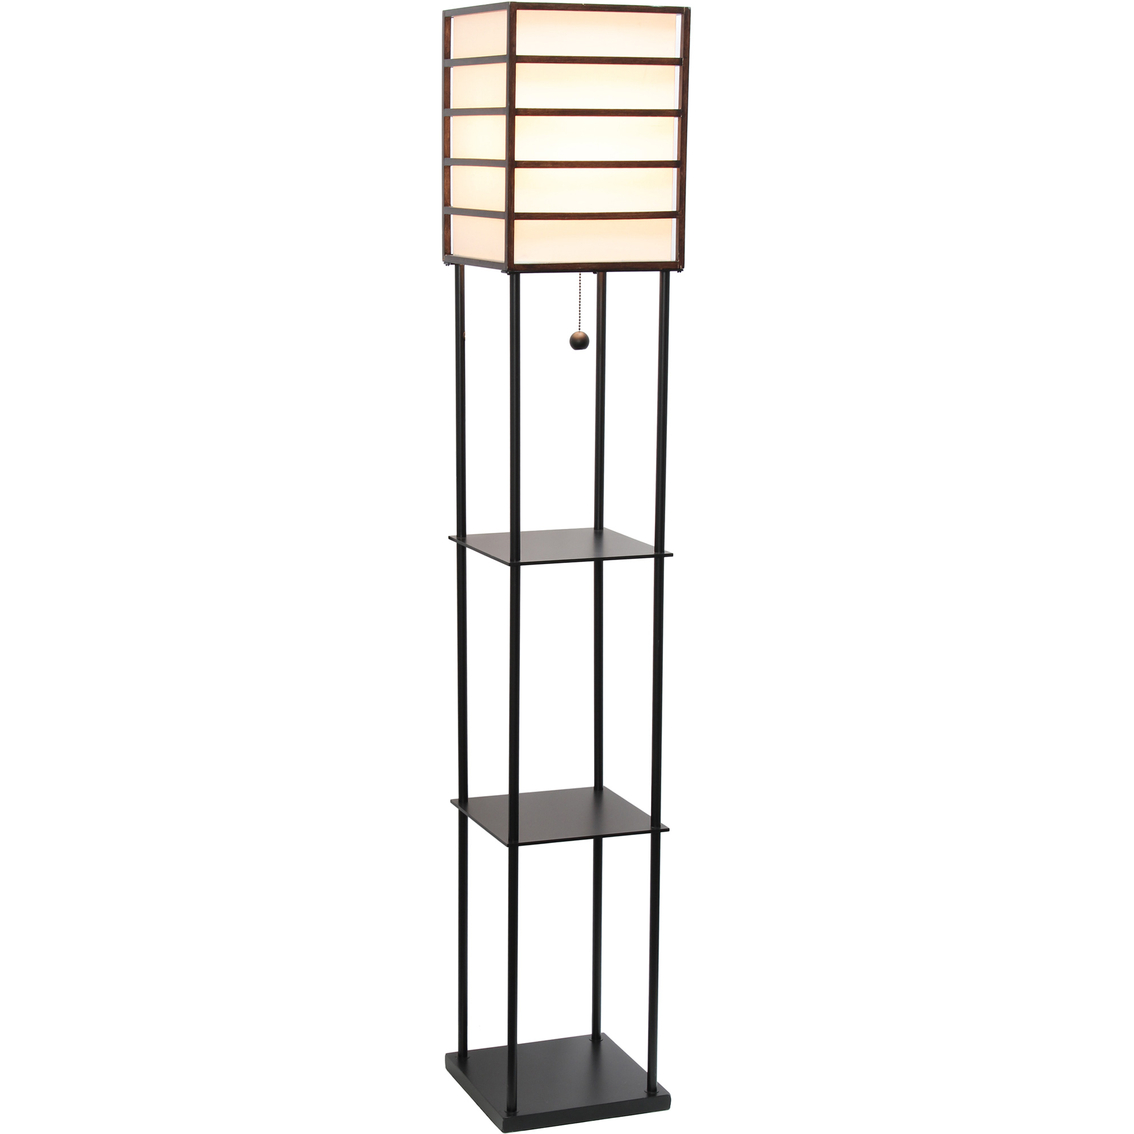 Lalia Home Metal Etagere 60 in. Floor Lamp with Storage Shelves - Image 2 of 7